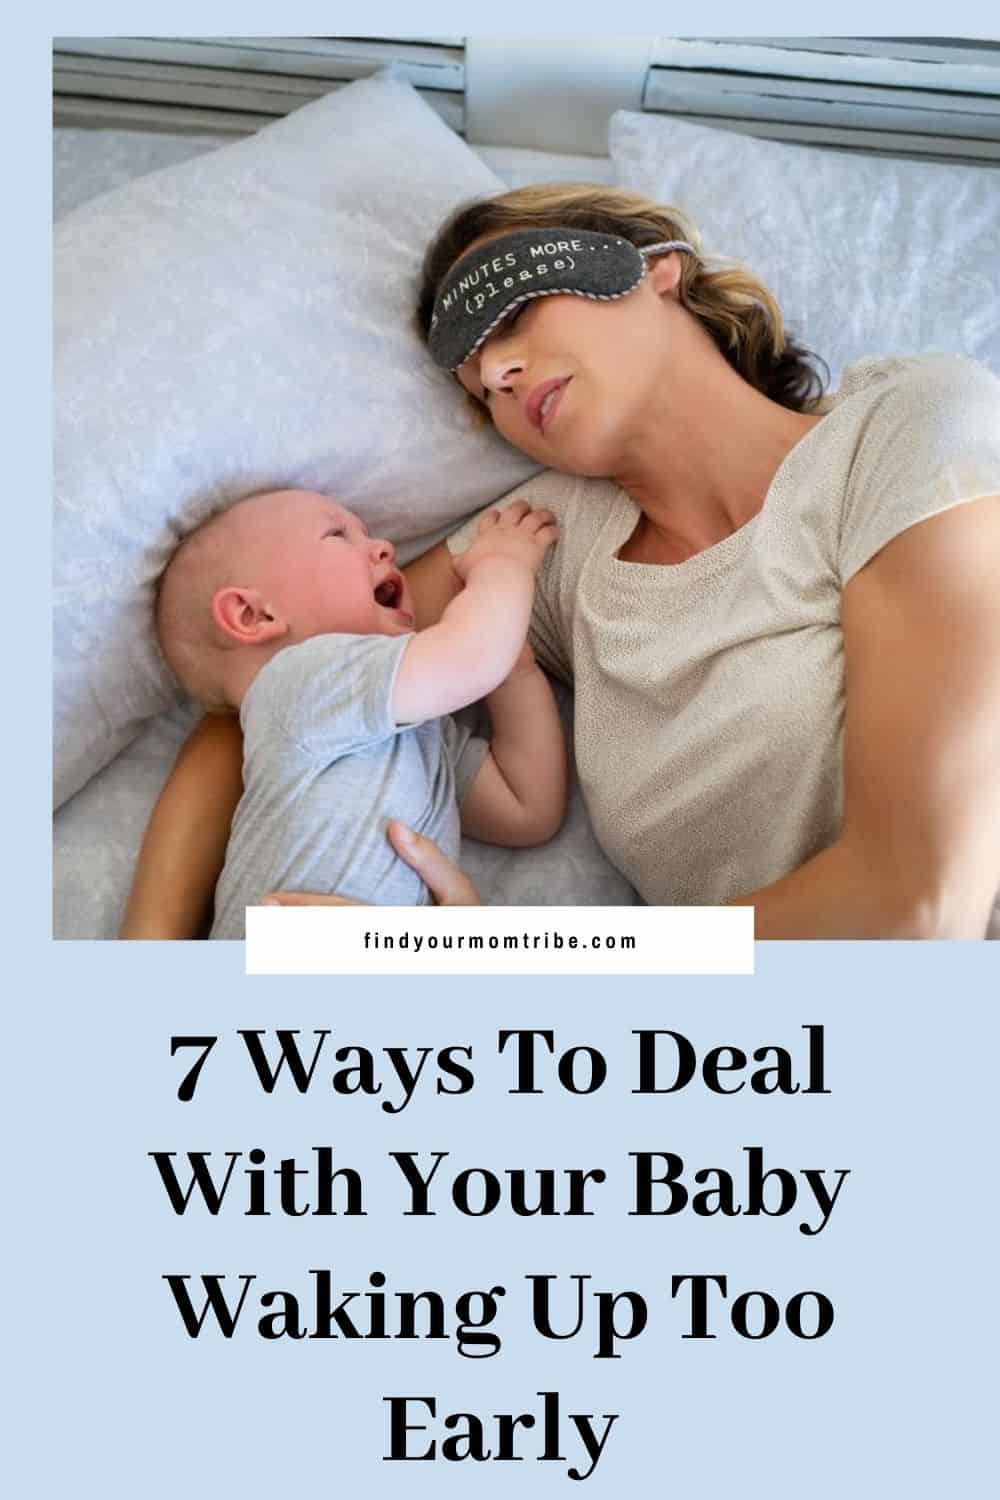 7 Ways To Deal With Your Baby Waking Up Too Early